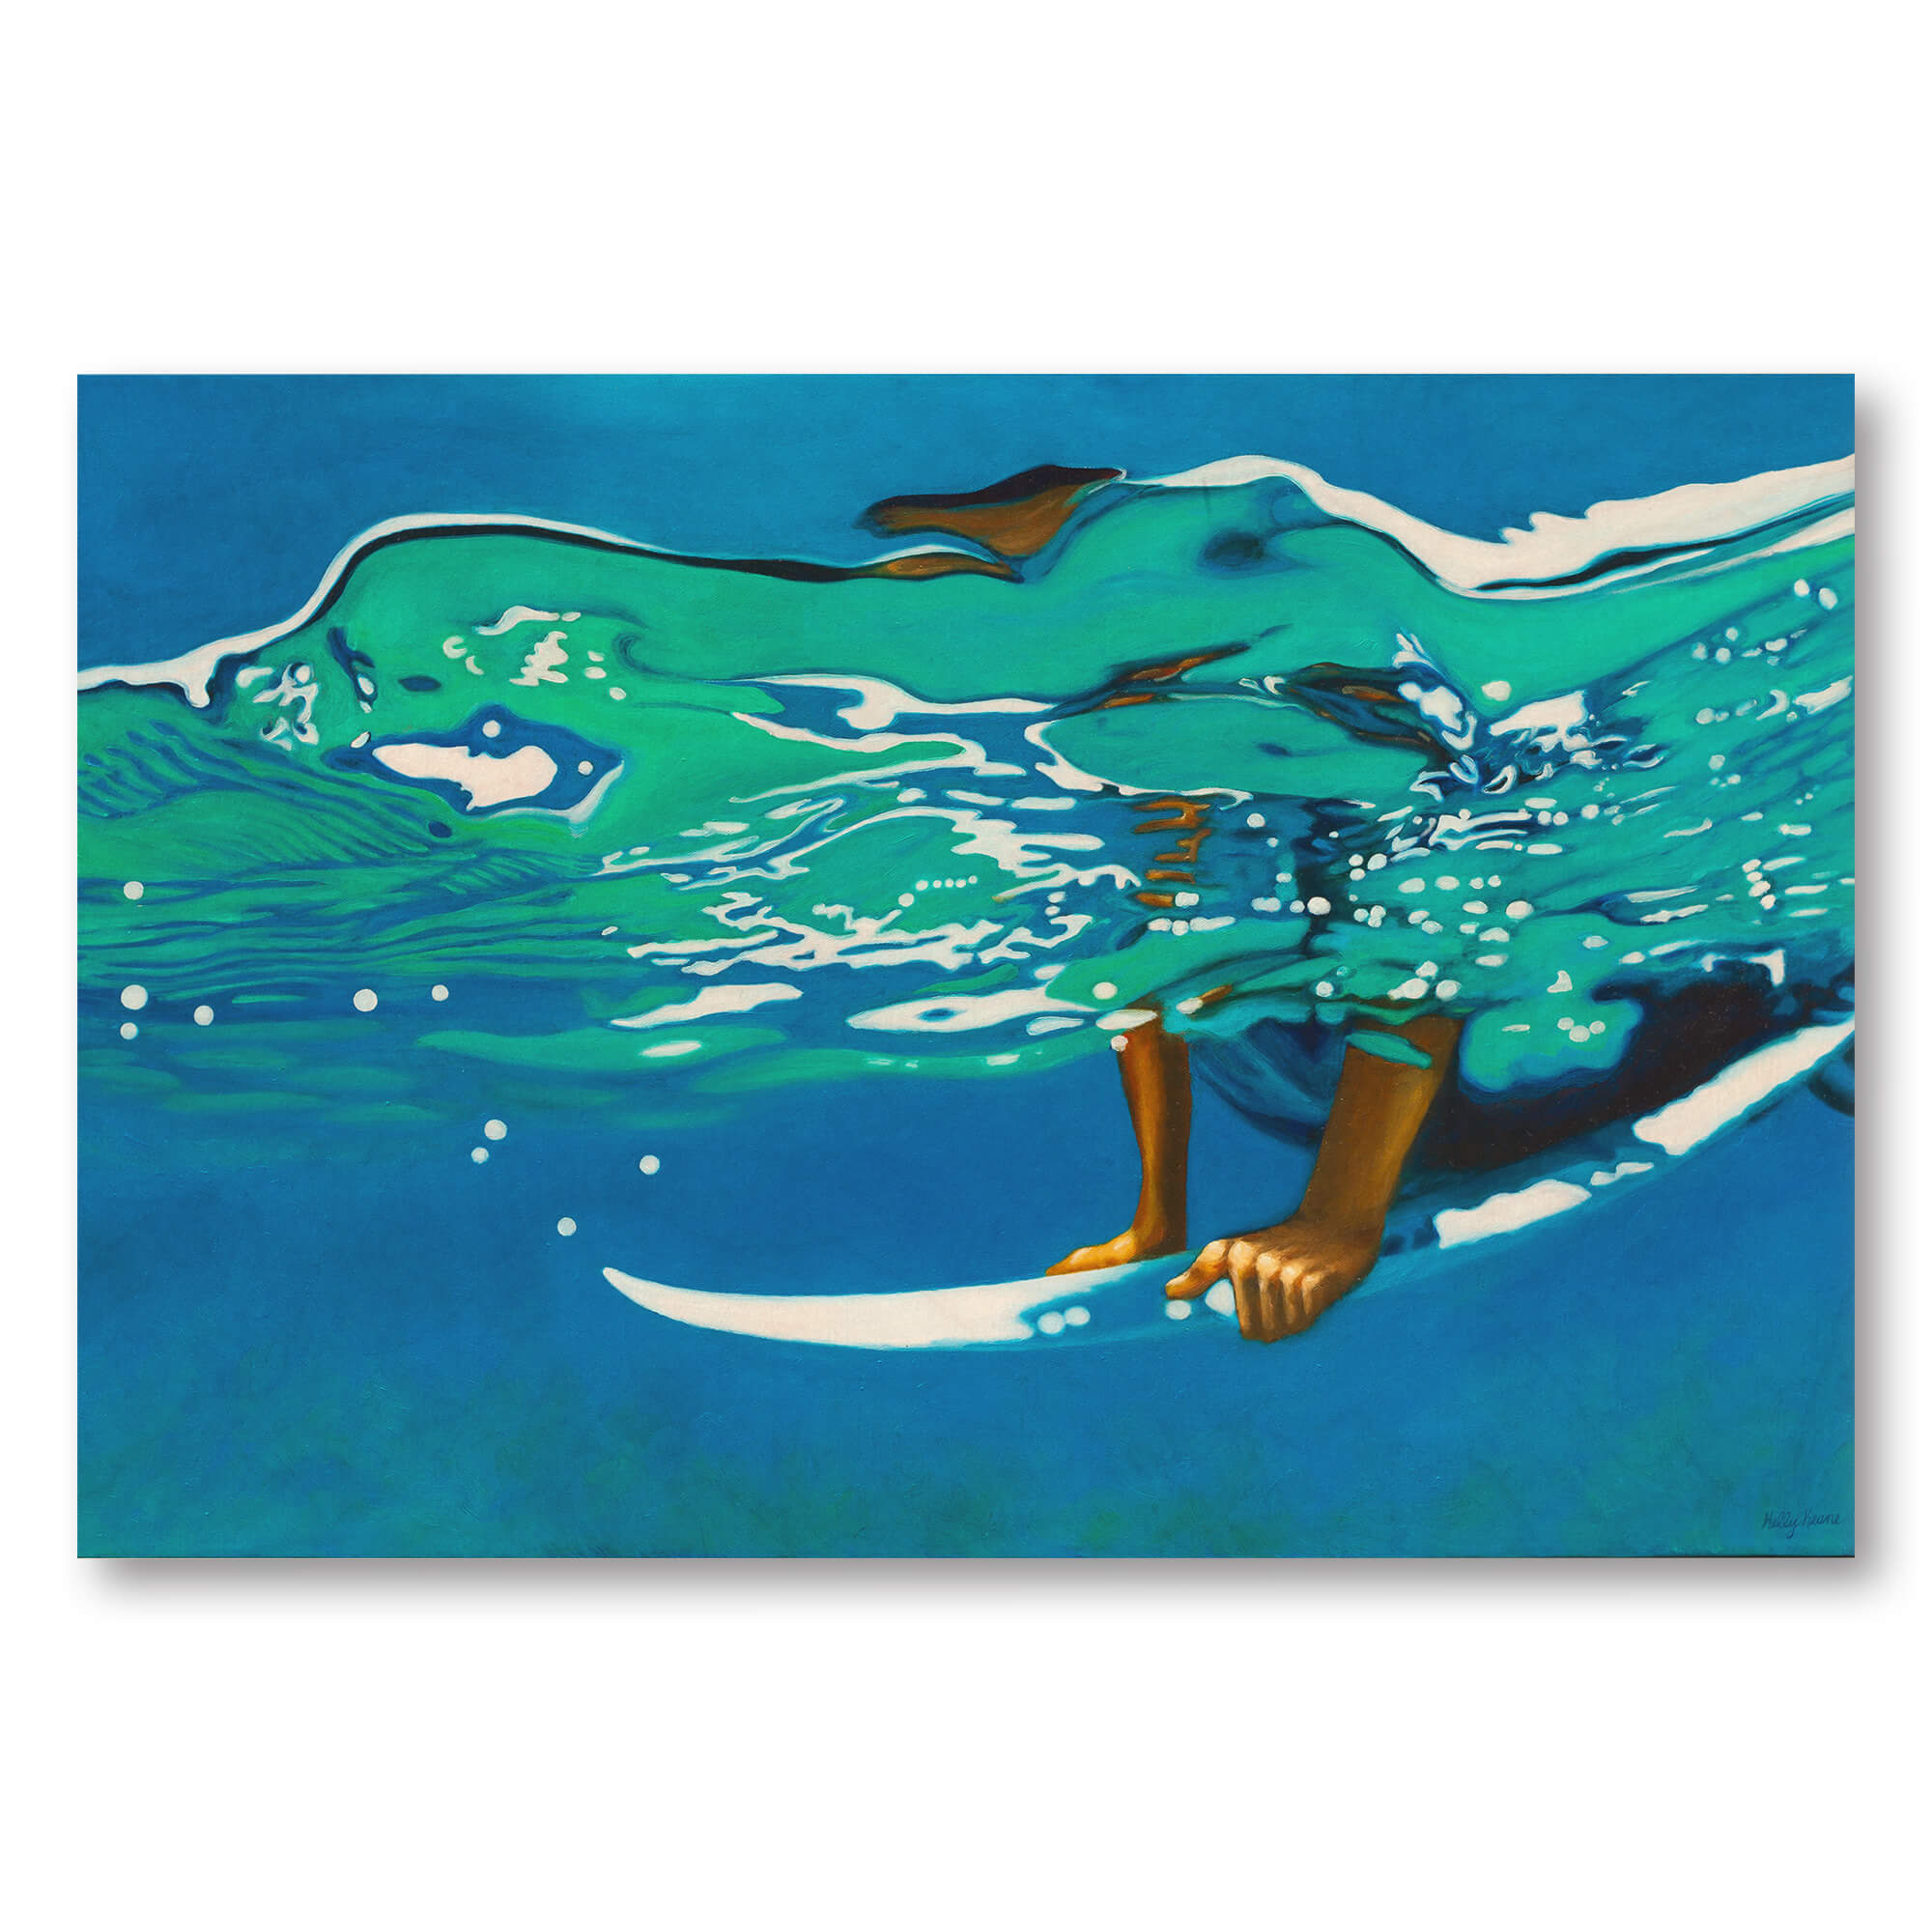 Birch wood print of a person on a surfboard with a crystal clear ocean water by Hawaii artist Kelly Keane